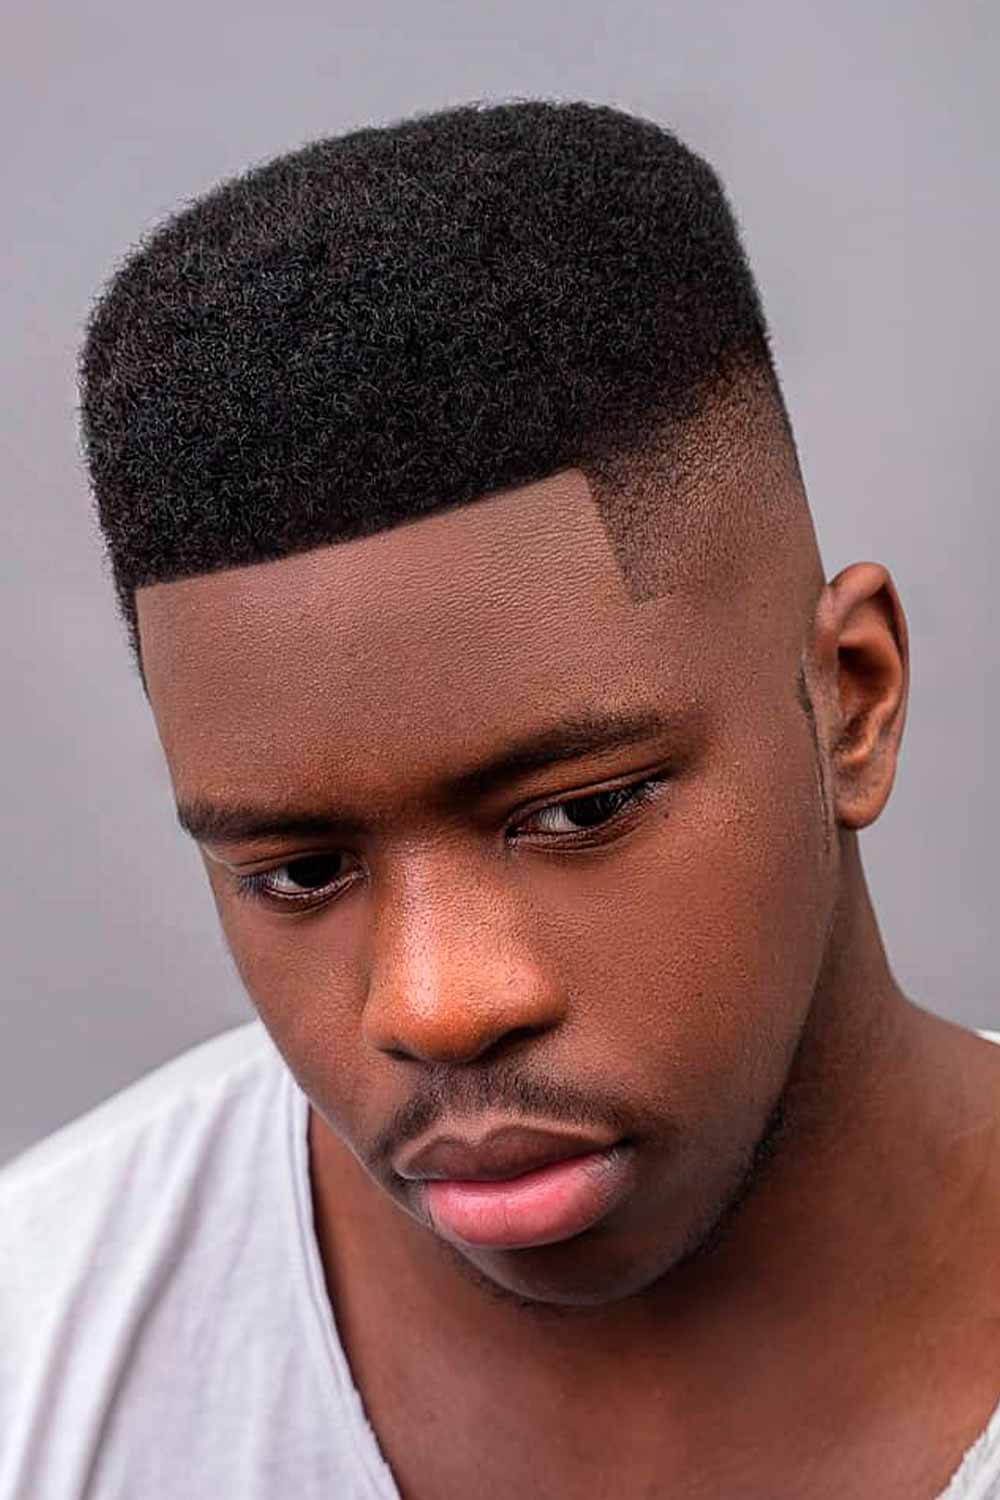 Fashionable Youth Haircuts For Teenage Boys The Best Options In 2023|  Coolest Teen Boy Haircuts To Try In 2022 | Best Hairstyles | Le Coiffeur